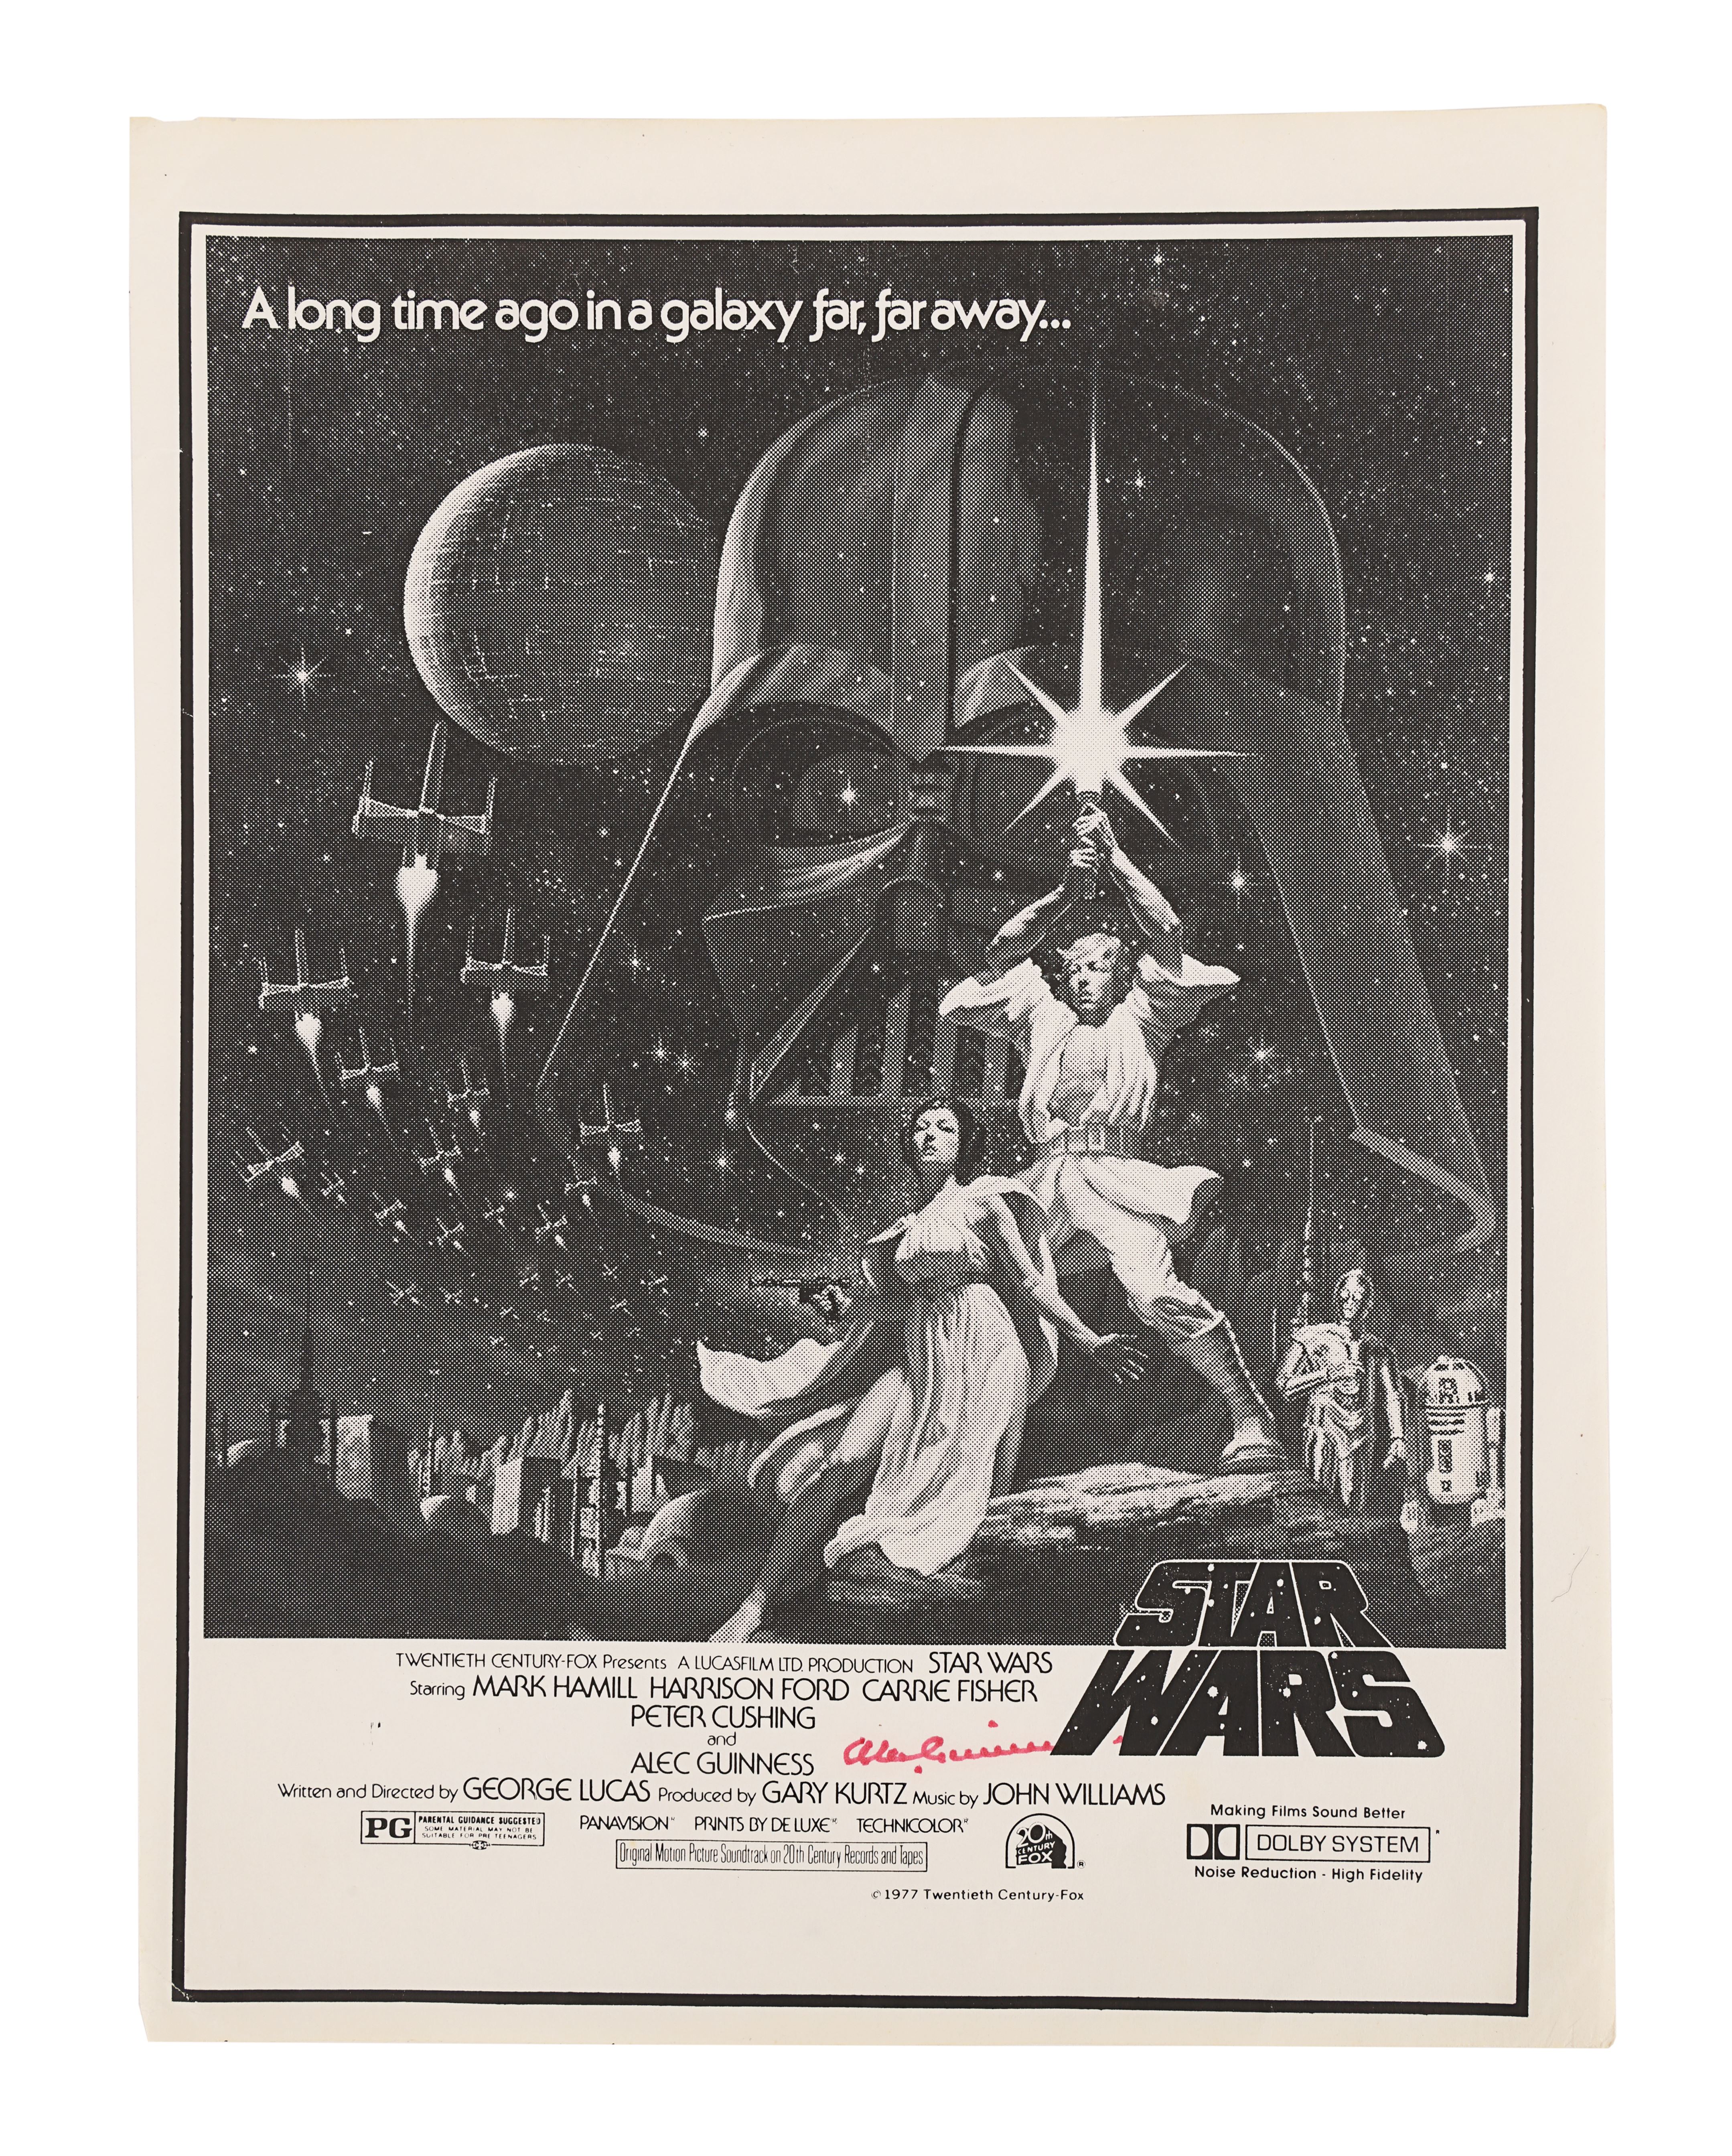 STAR WARS: A NEW HOPE (1977) - Alec Guinness Autographed Mini Poster Image